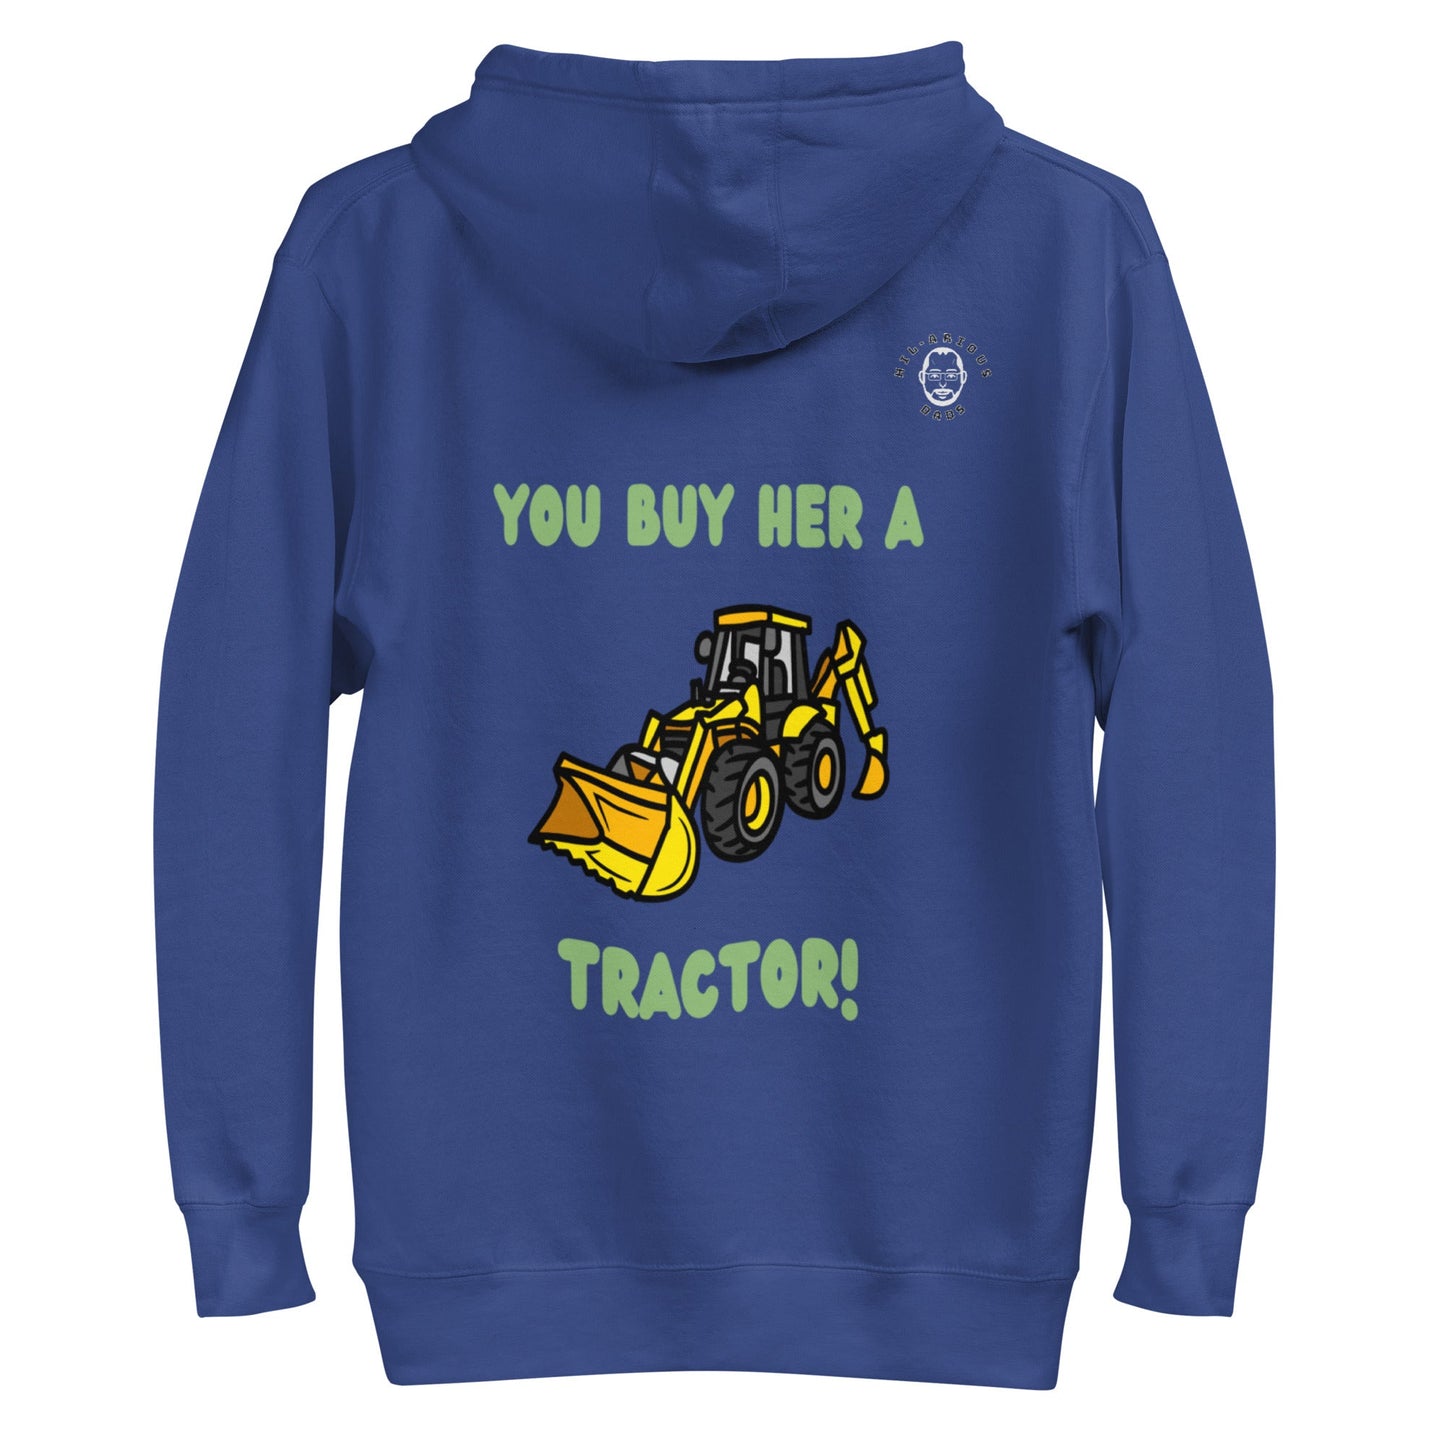 How do you get a country girl's attention?-Hoodie - Hil-arious Dads